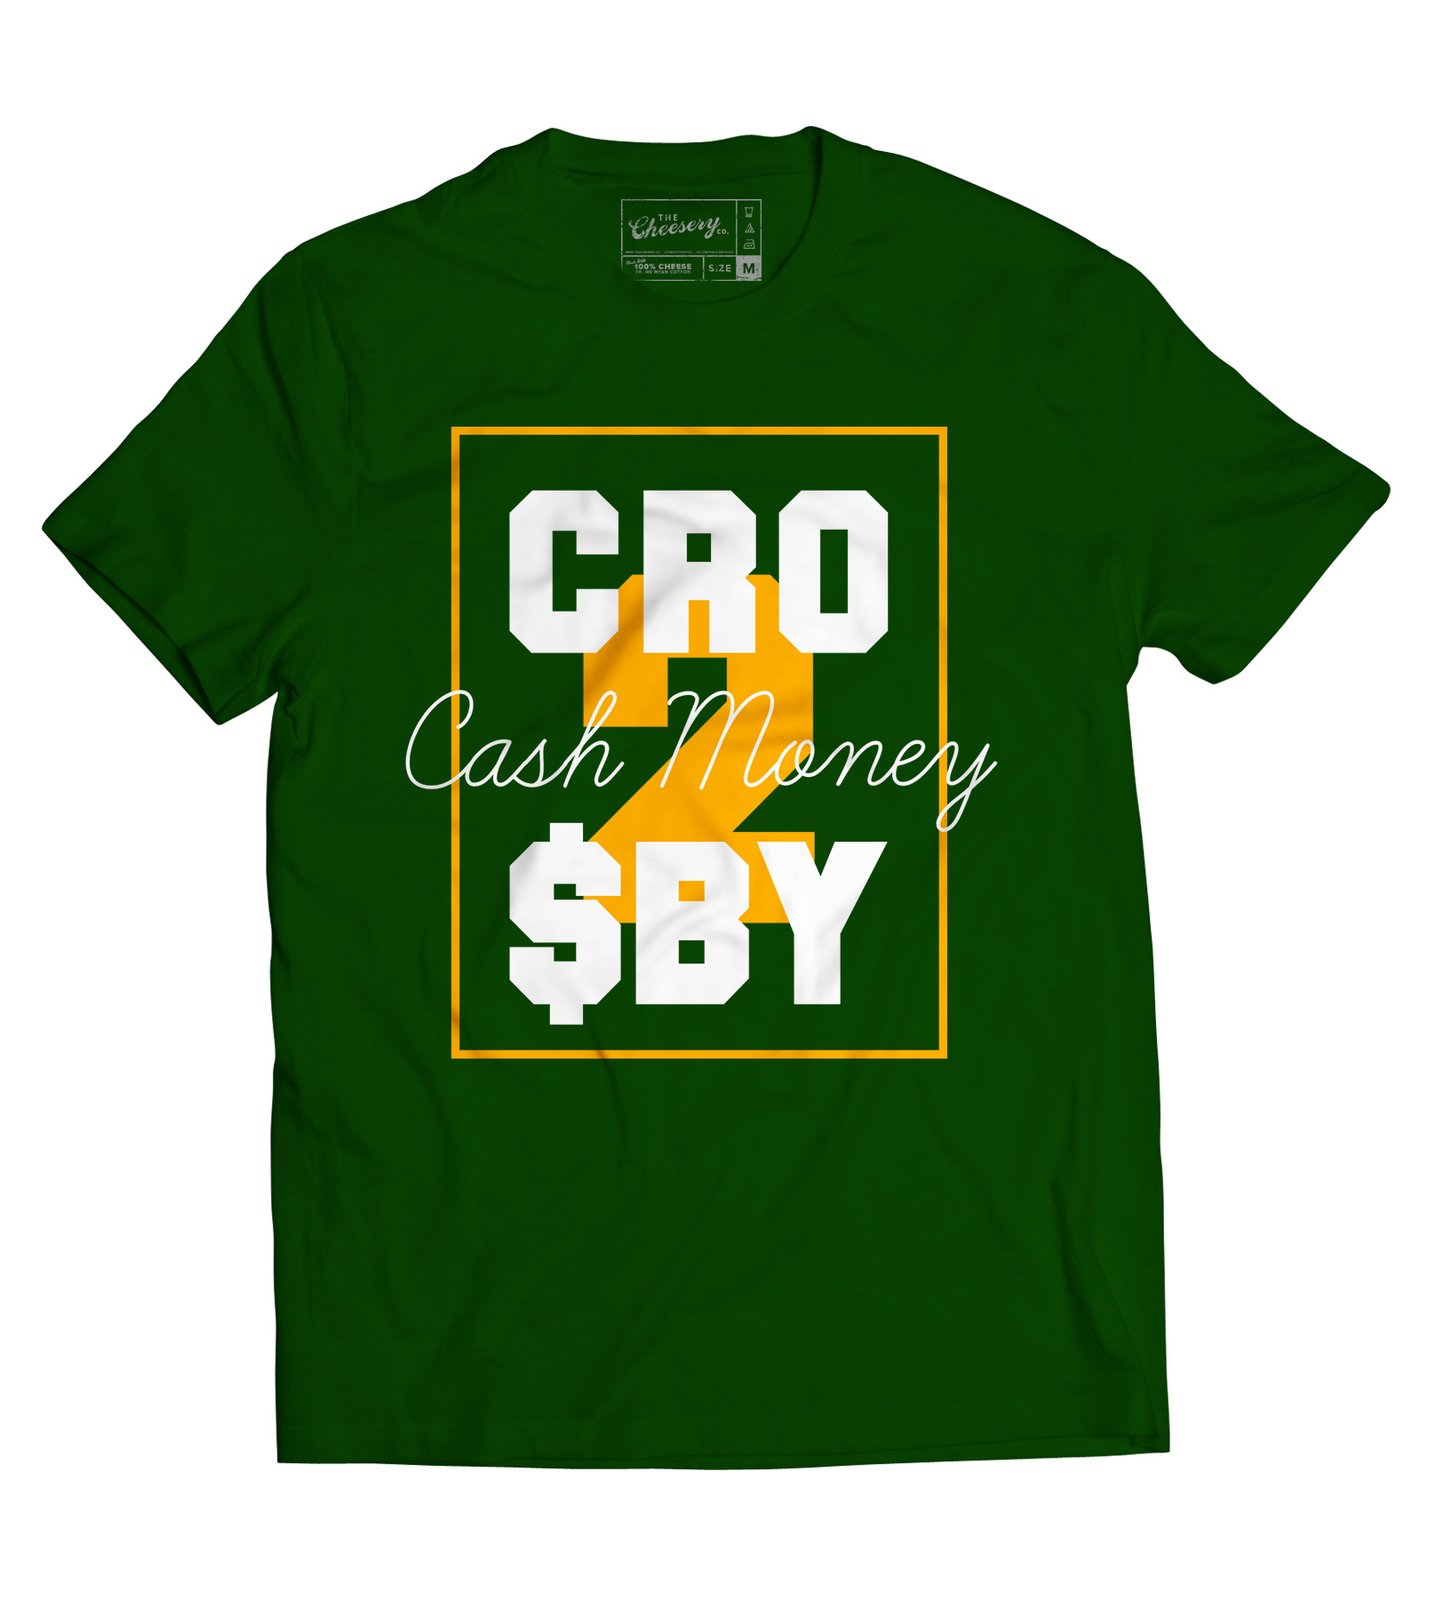 CASH MONEY CRO$BY / The Cheesery Co.